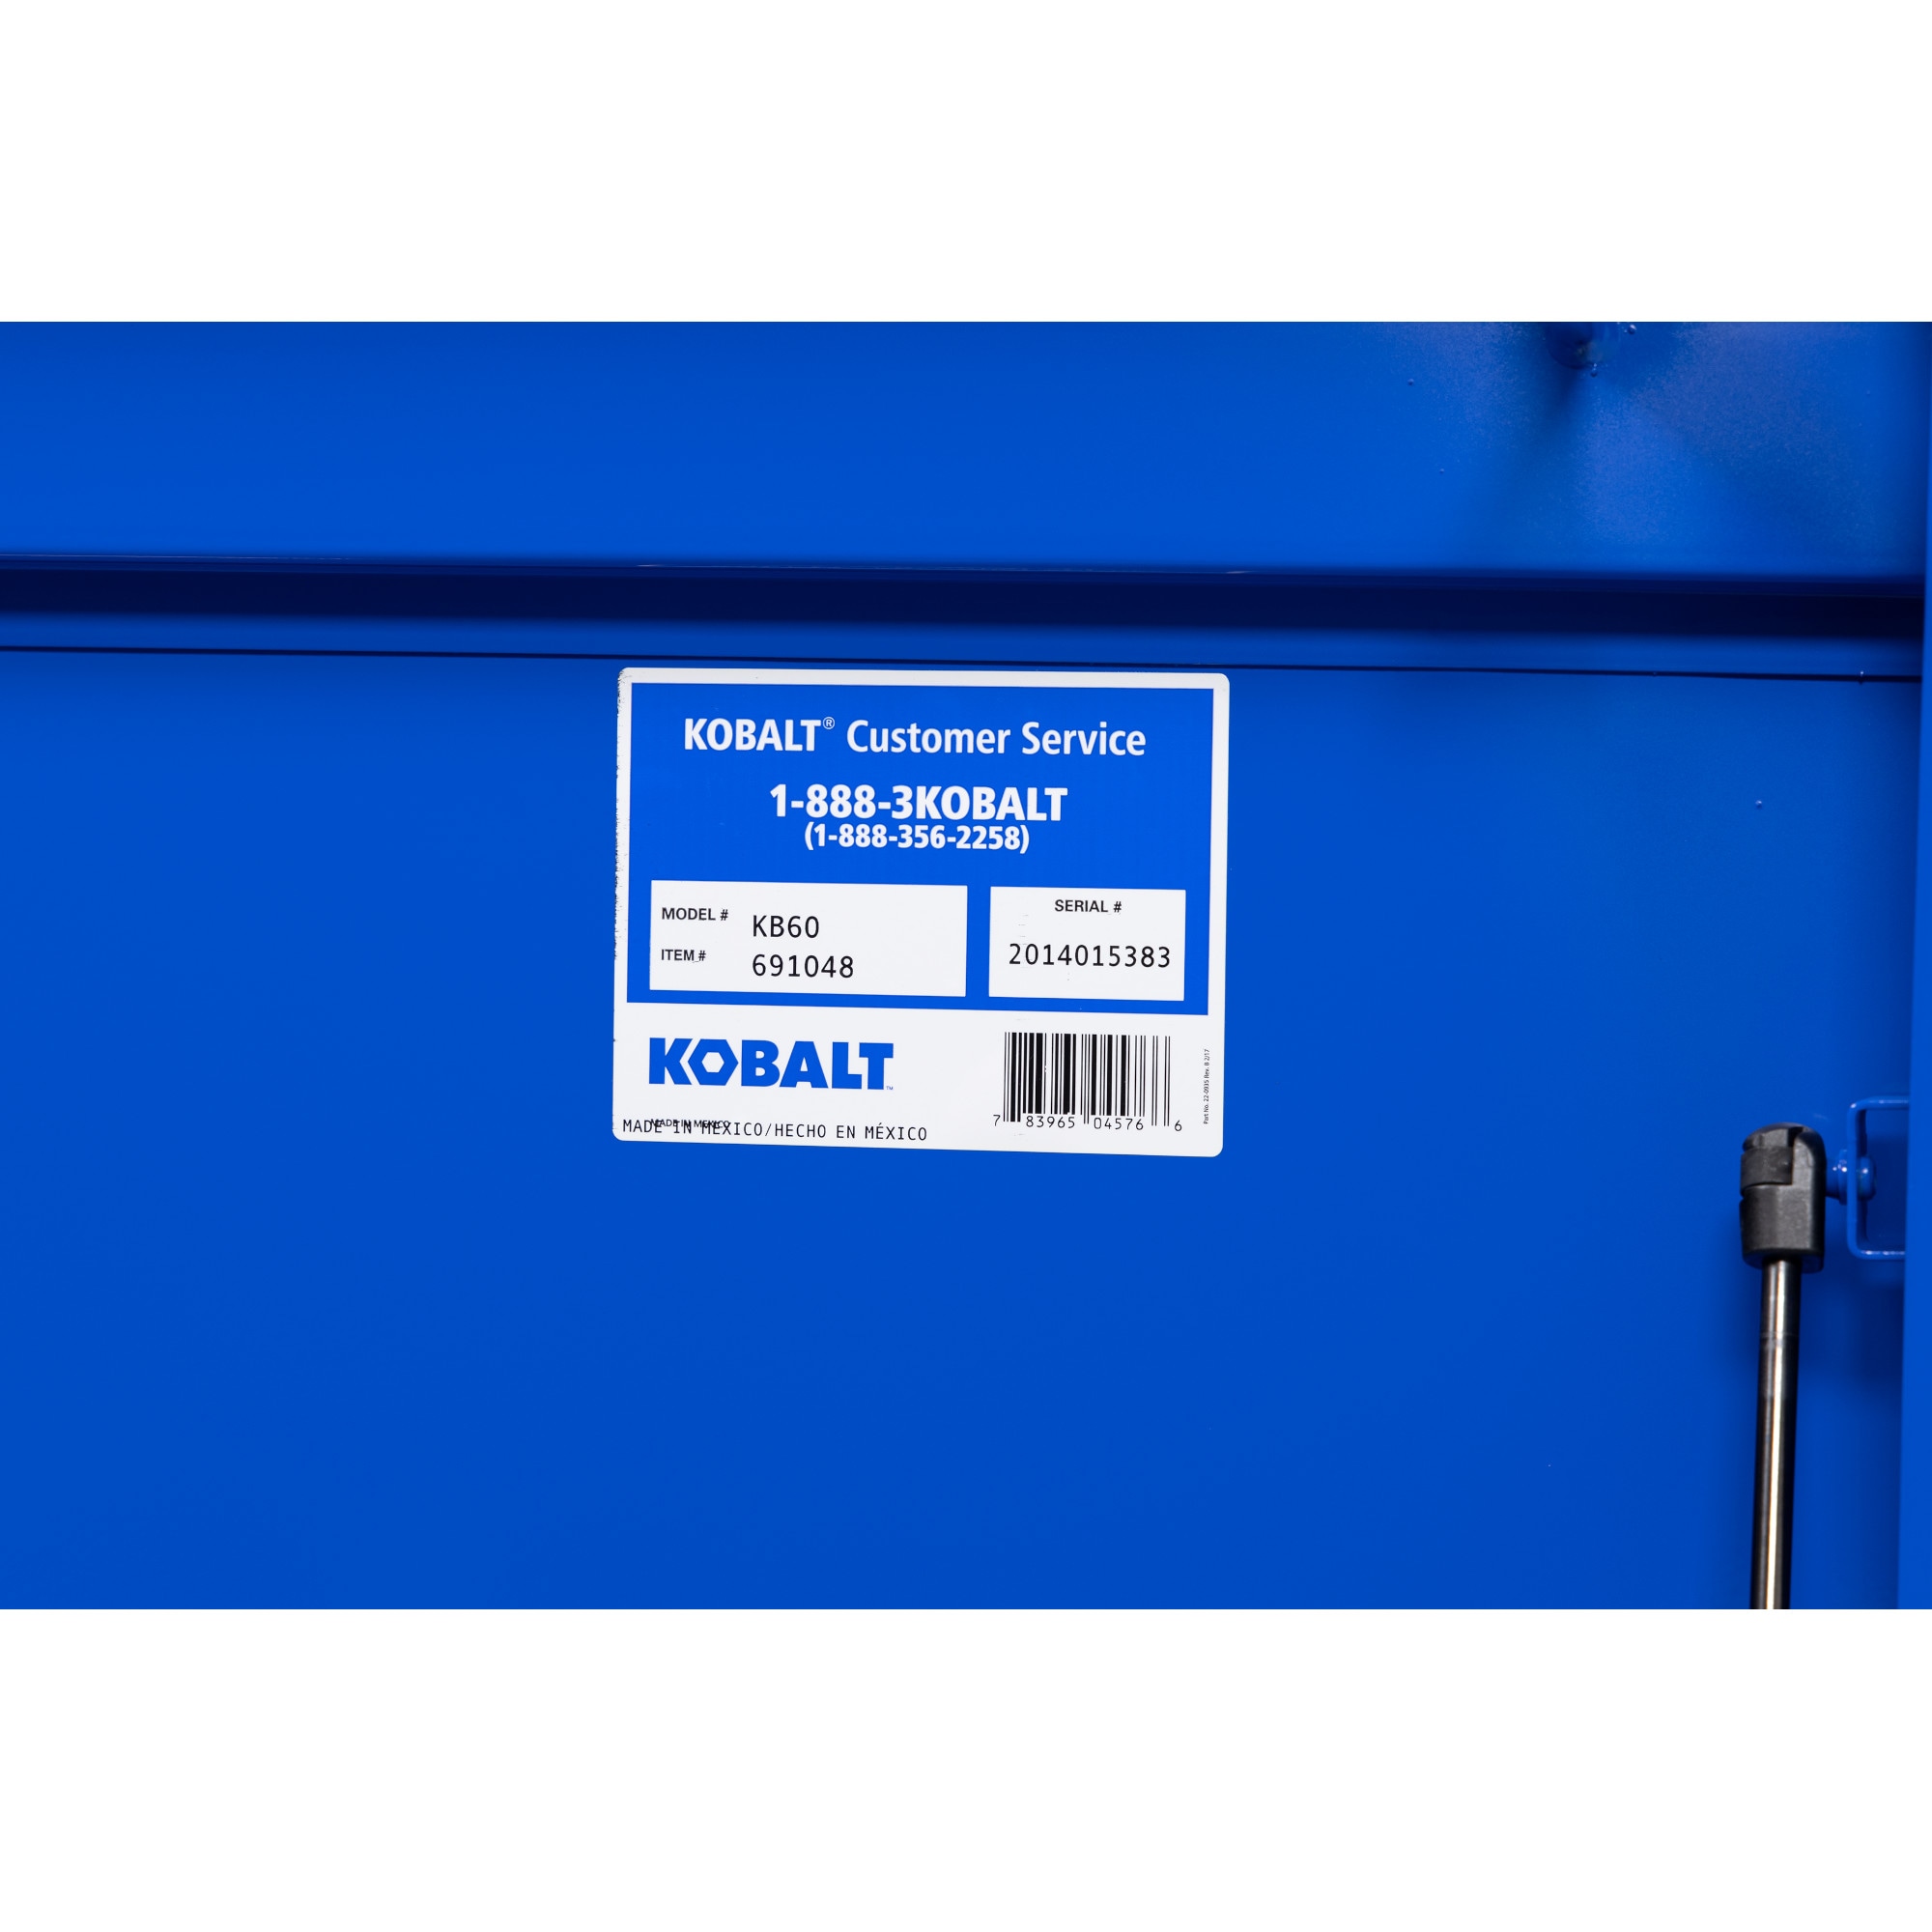 Kobalt 19-in W x 32-in L x 18-in H Blue Steel Jobsite Box in the Jobsite  Boxes department at